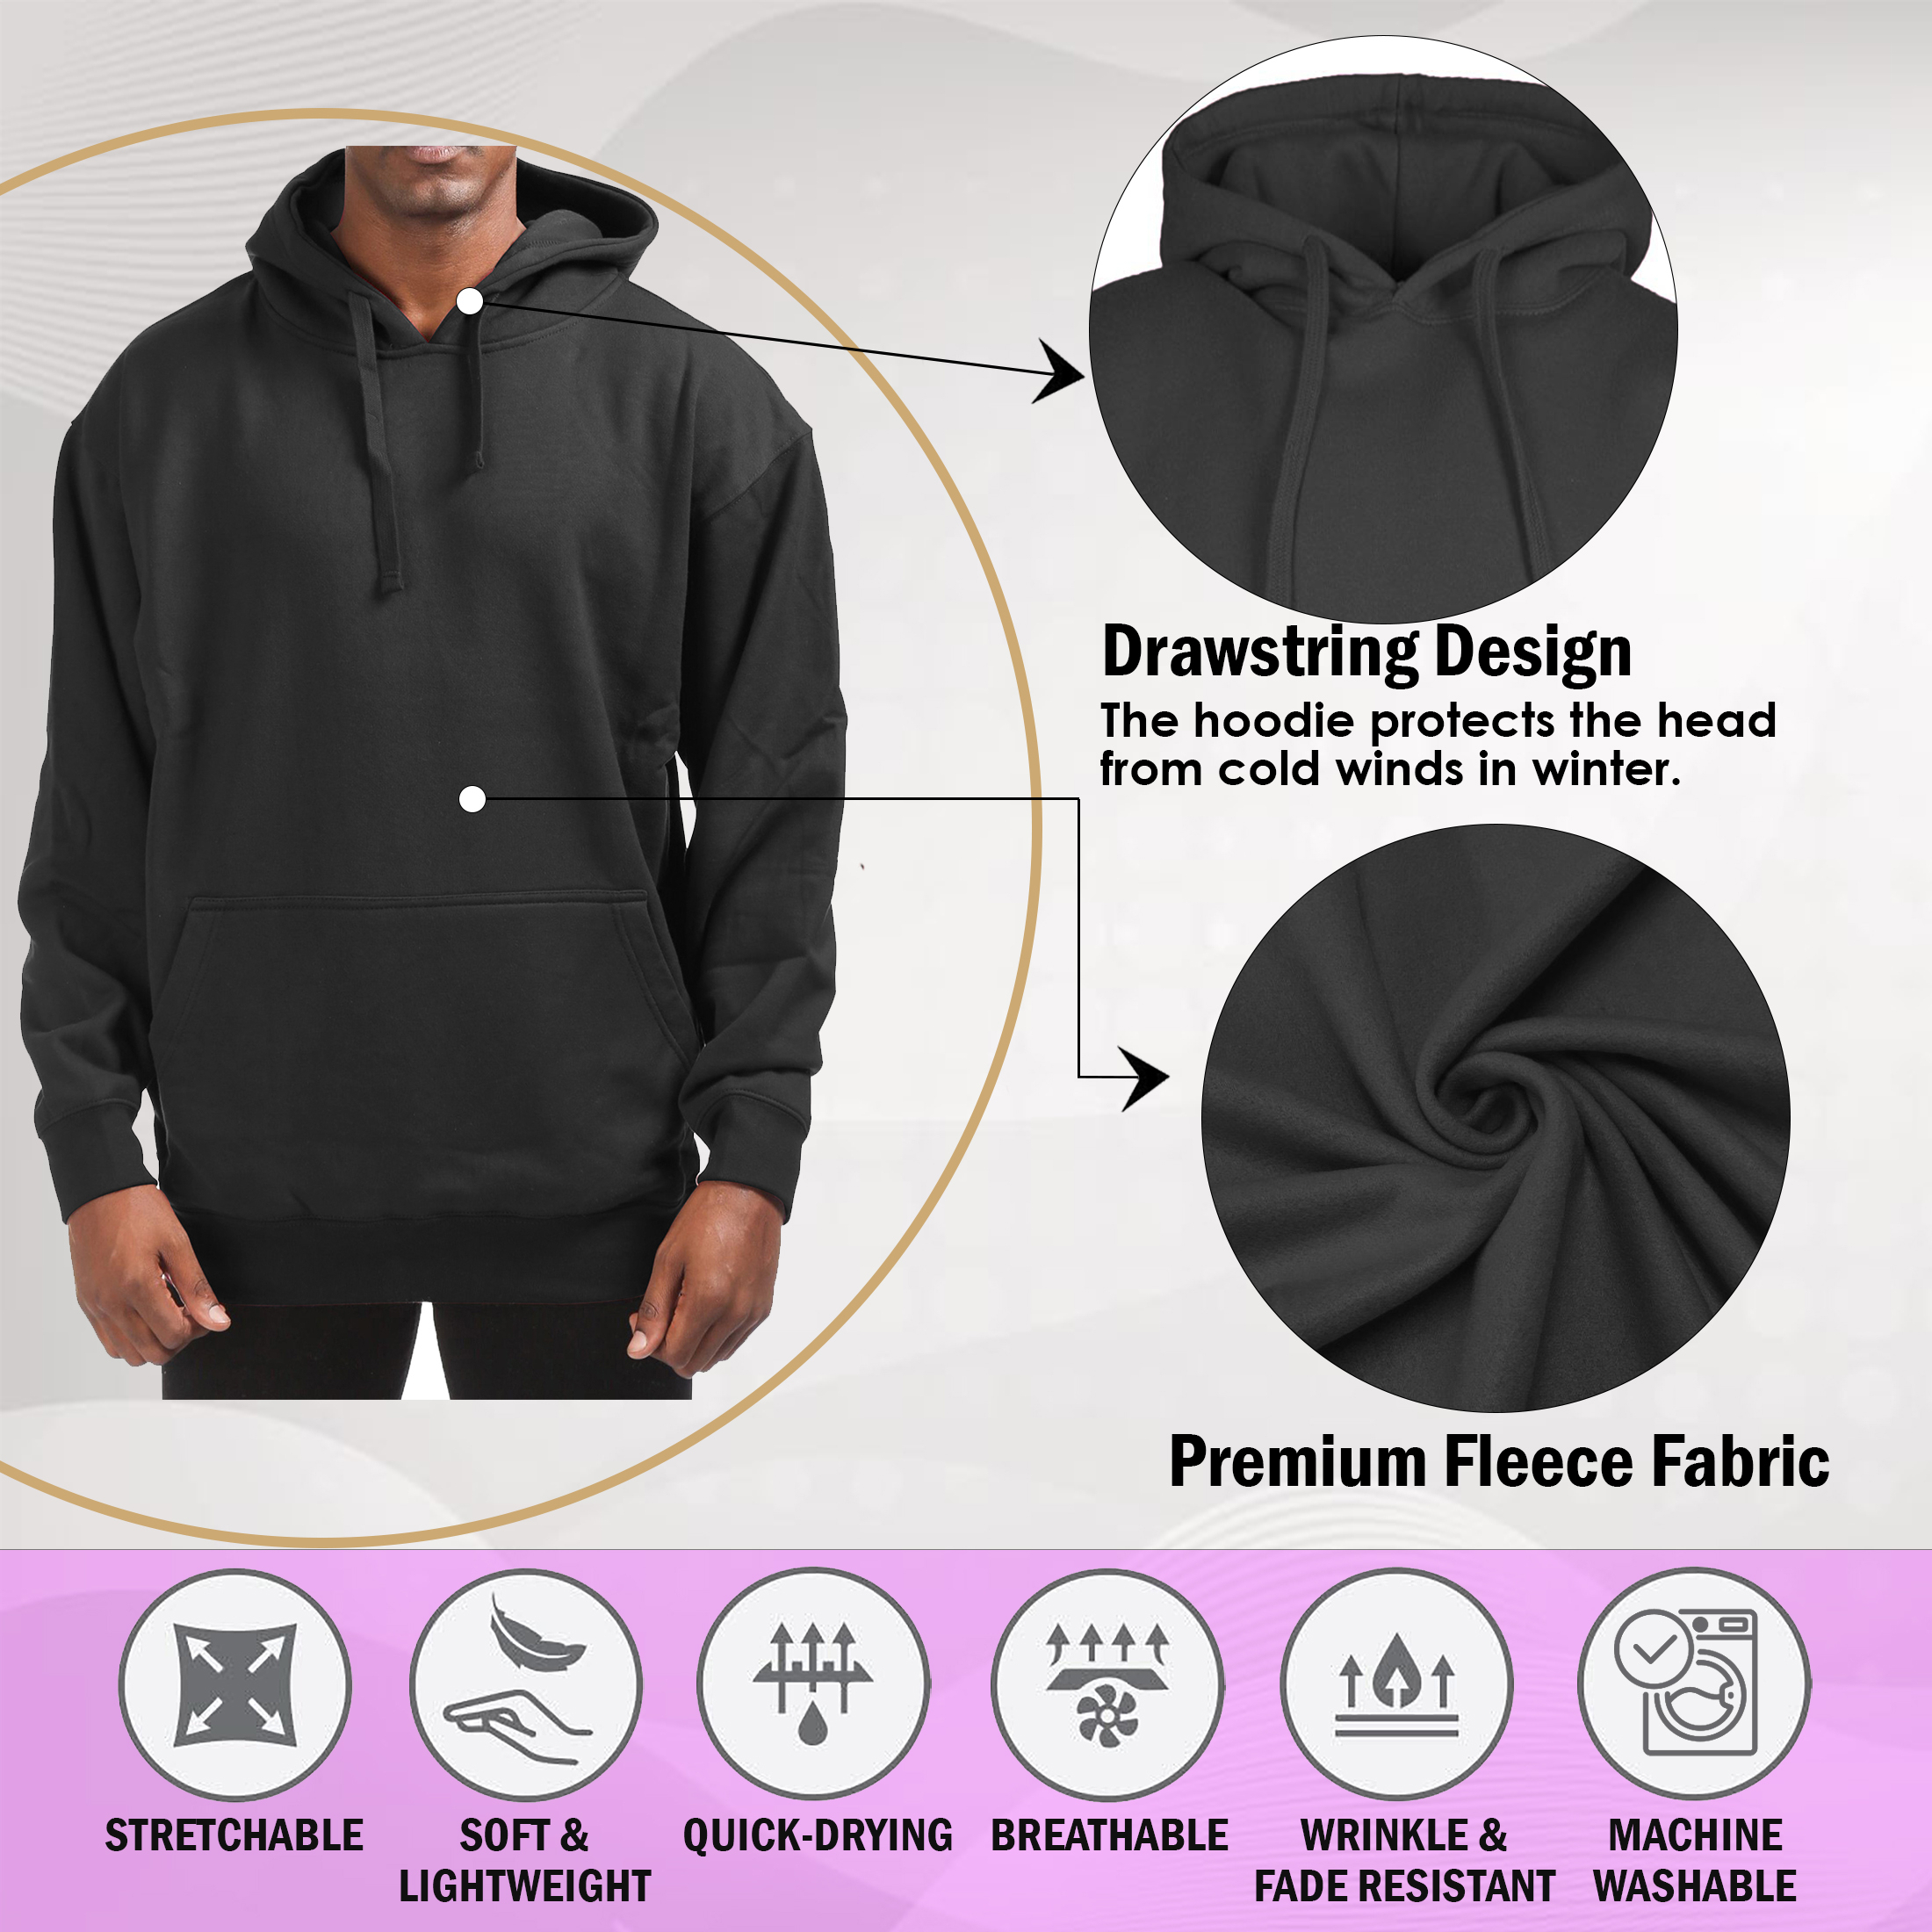 Men's Cotton-Blend Fleece Pullover Hoodie With Pocket (Big & Tall Sizes Available) - Black, X-Large